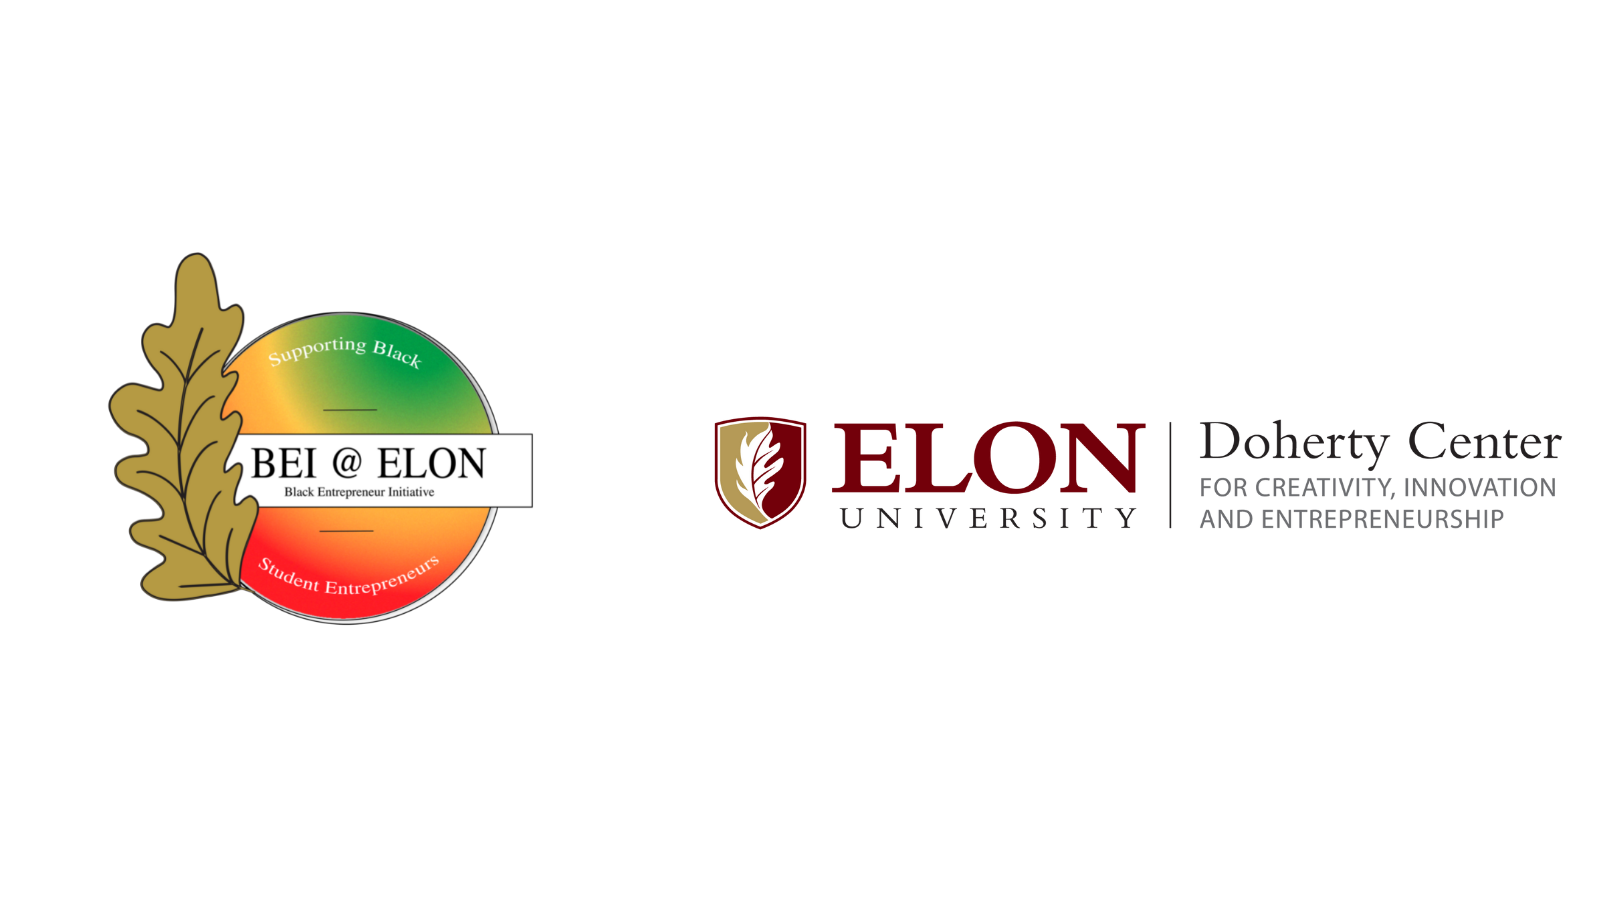 Black Entrepreneur Initiative at Elon and Doherty Center for Creativity, Innovation and Entrepenruship